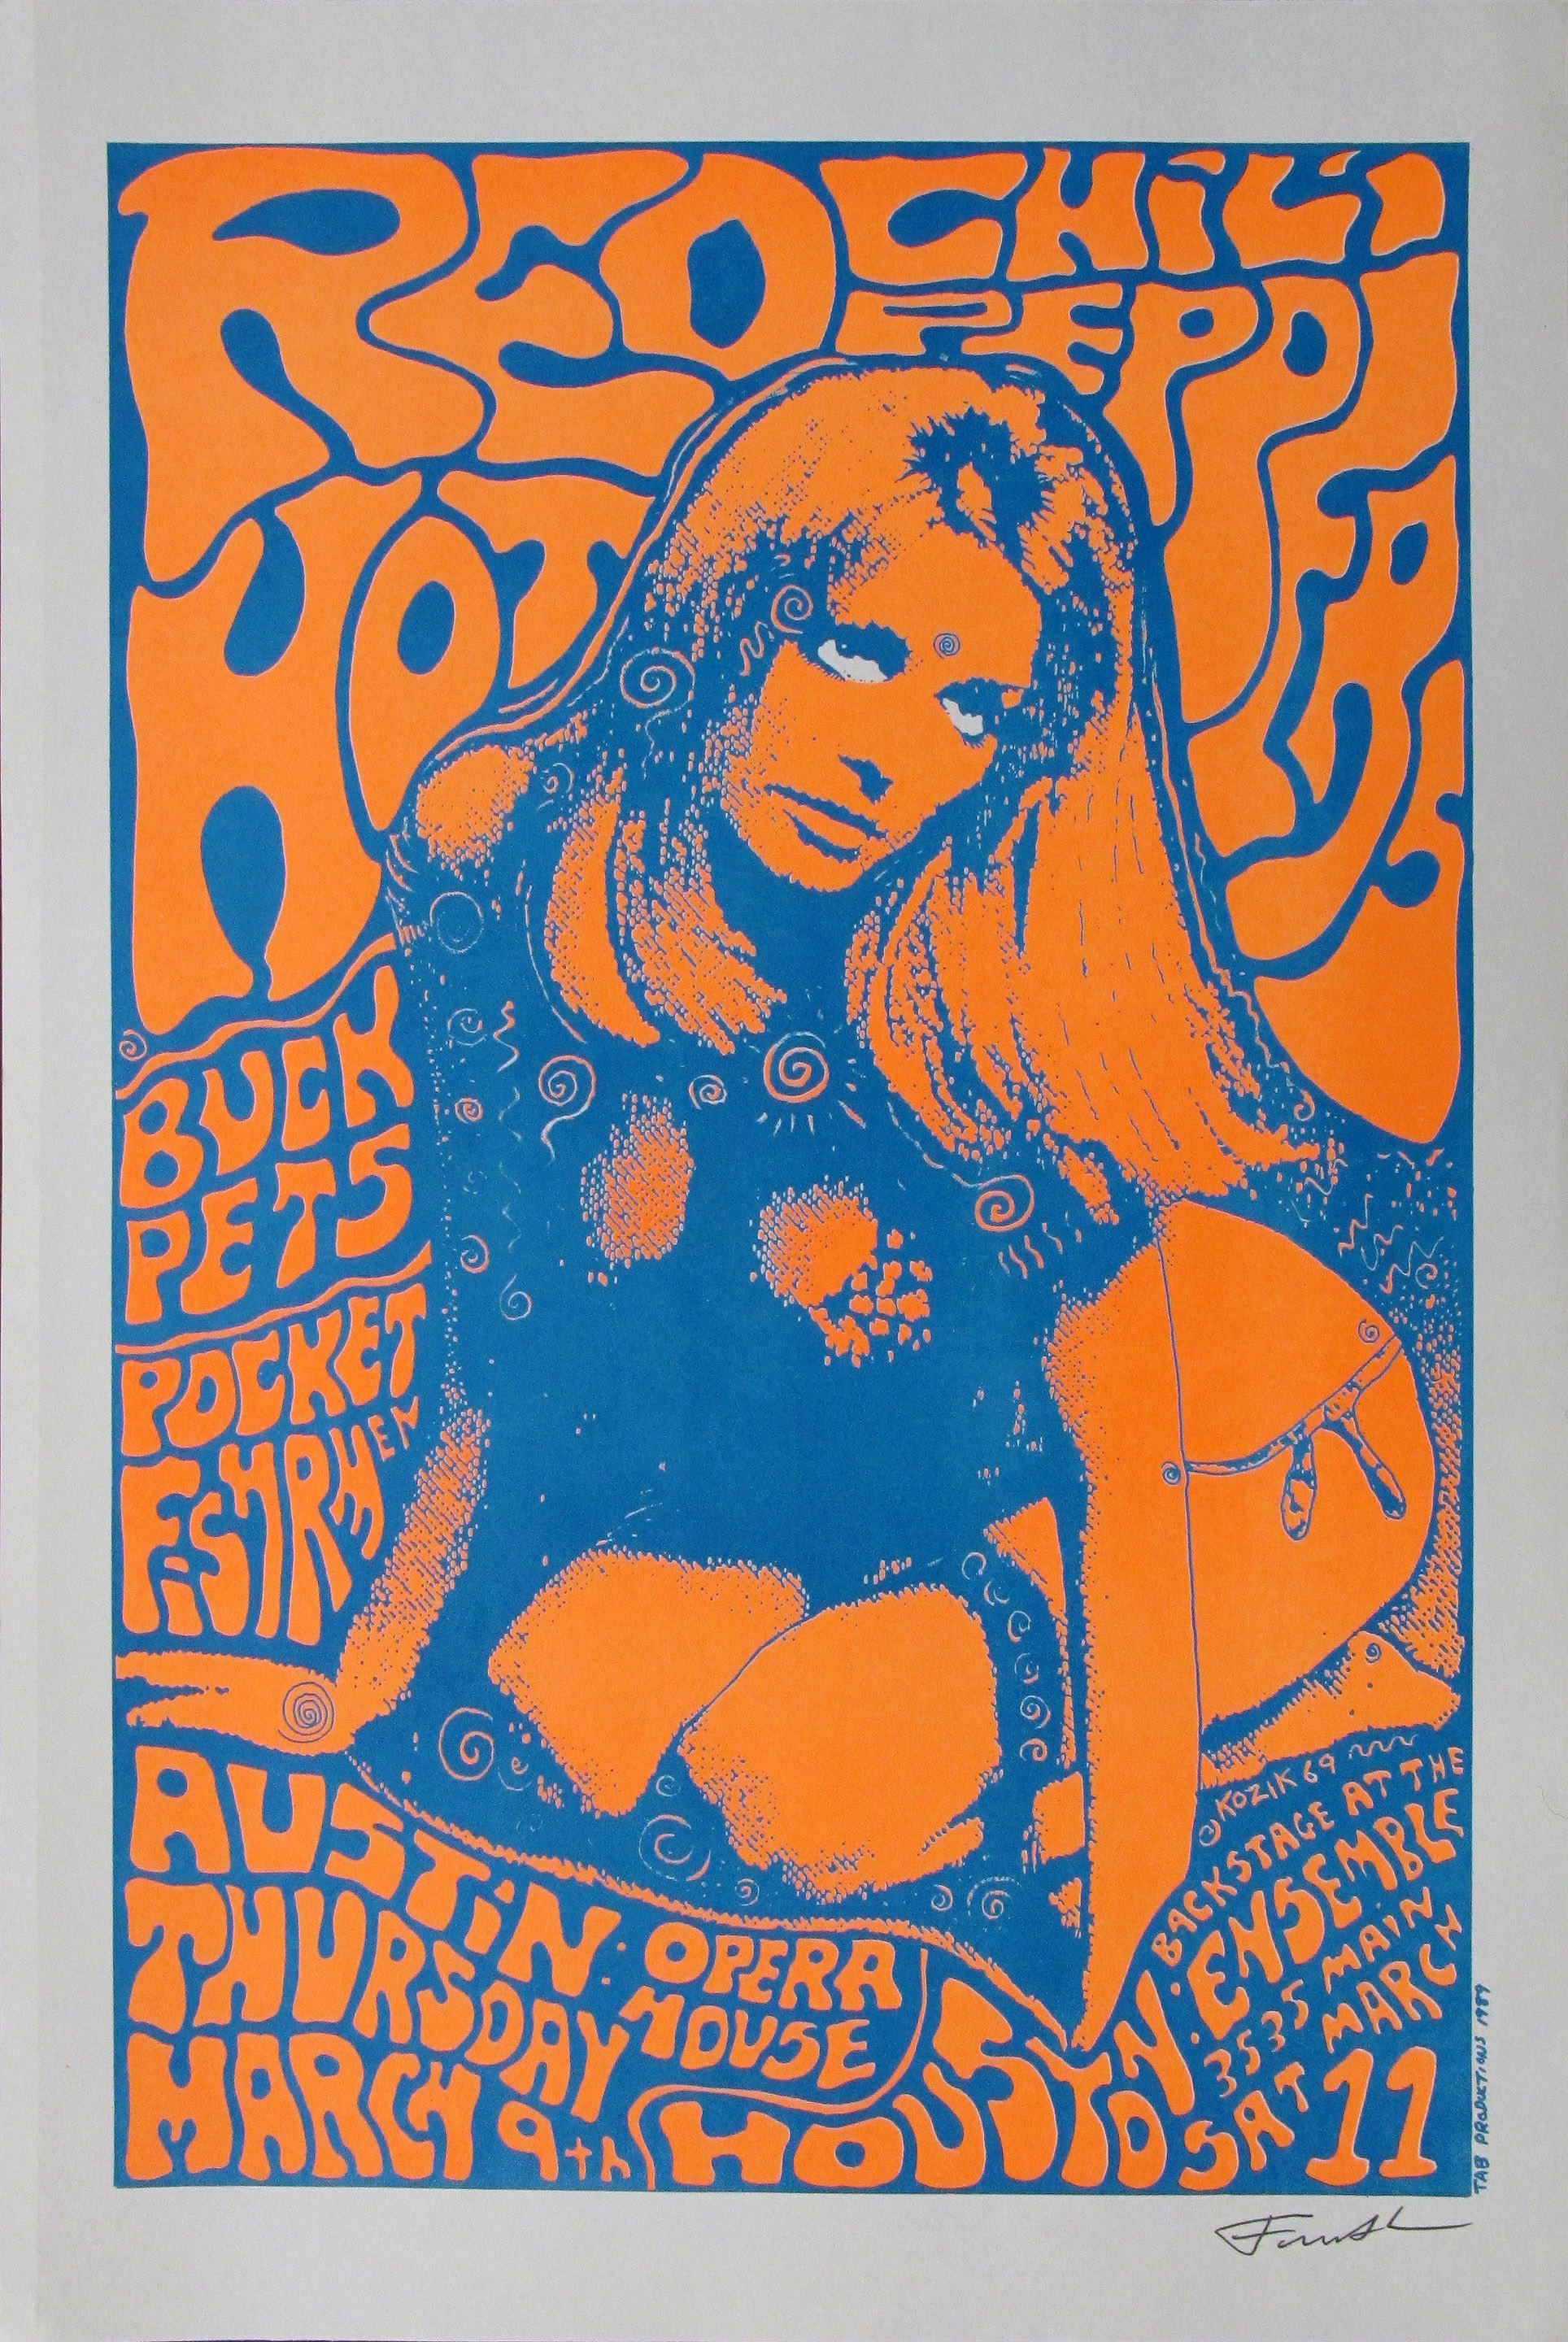 Red Hot Chili Peppers Original Concert Poster